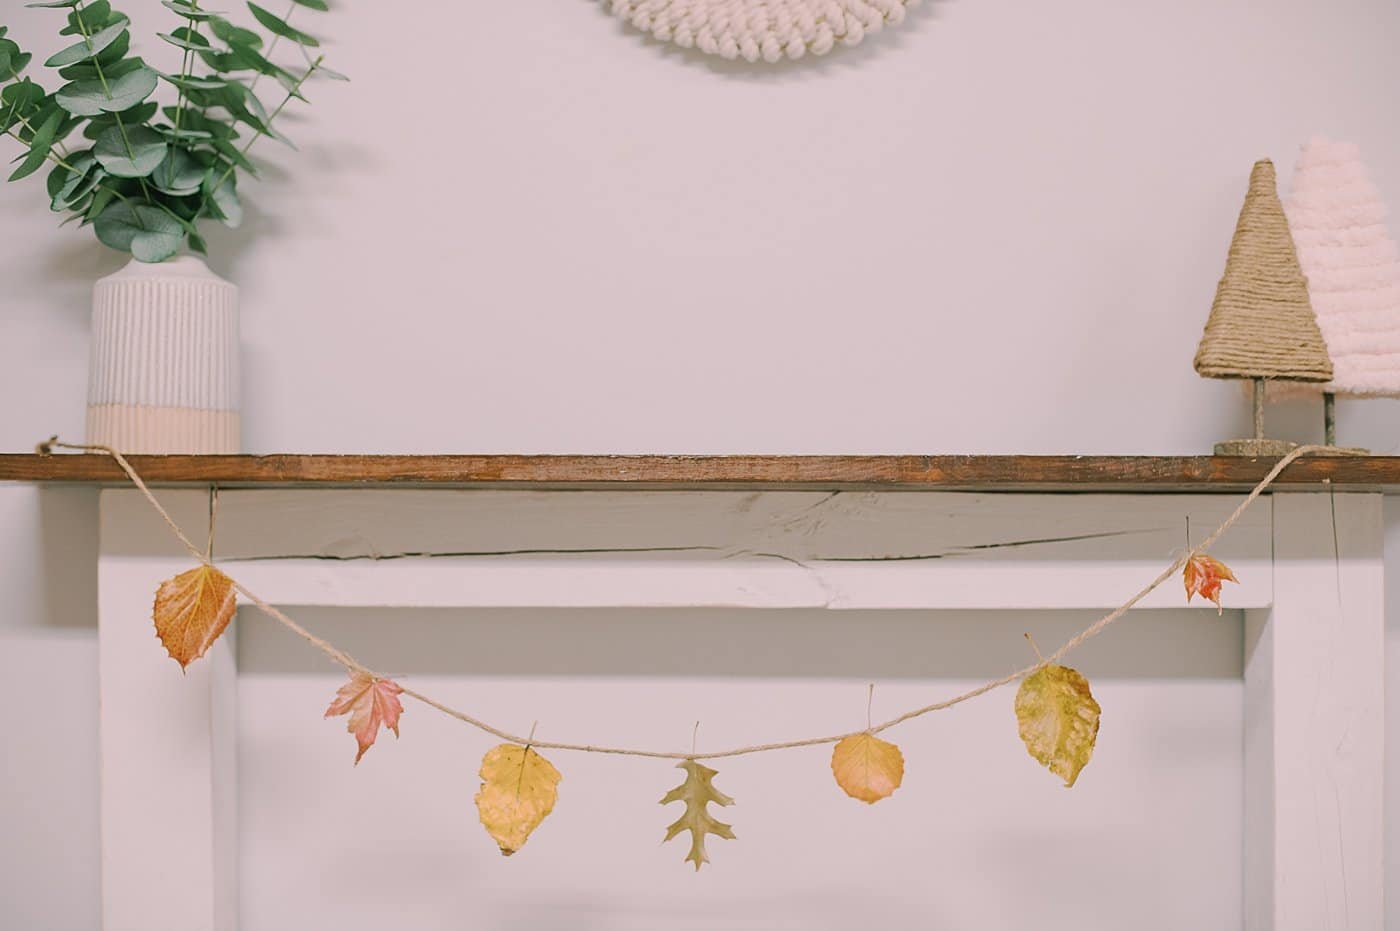 Beeswax-dipped leaf garland on a mantel.